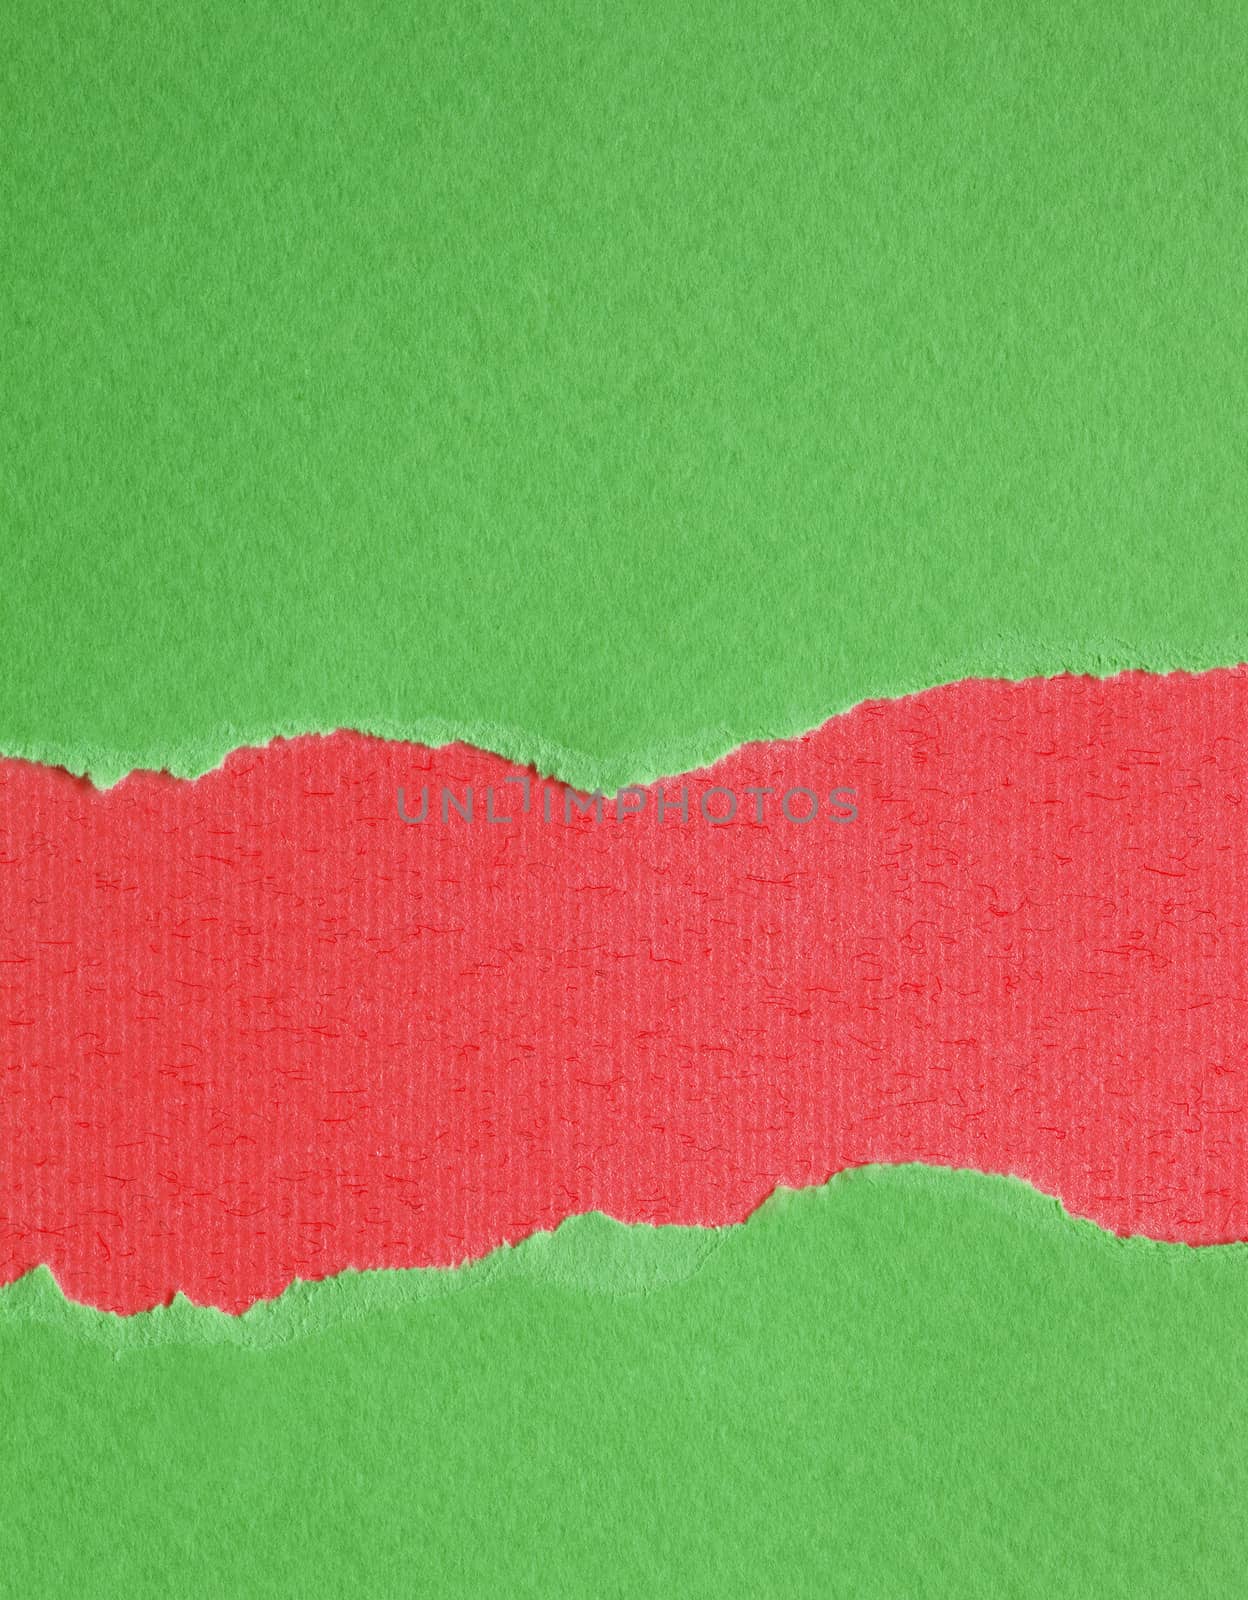 Green and Red Torn paper background